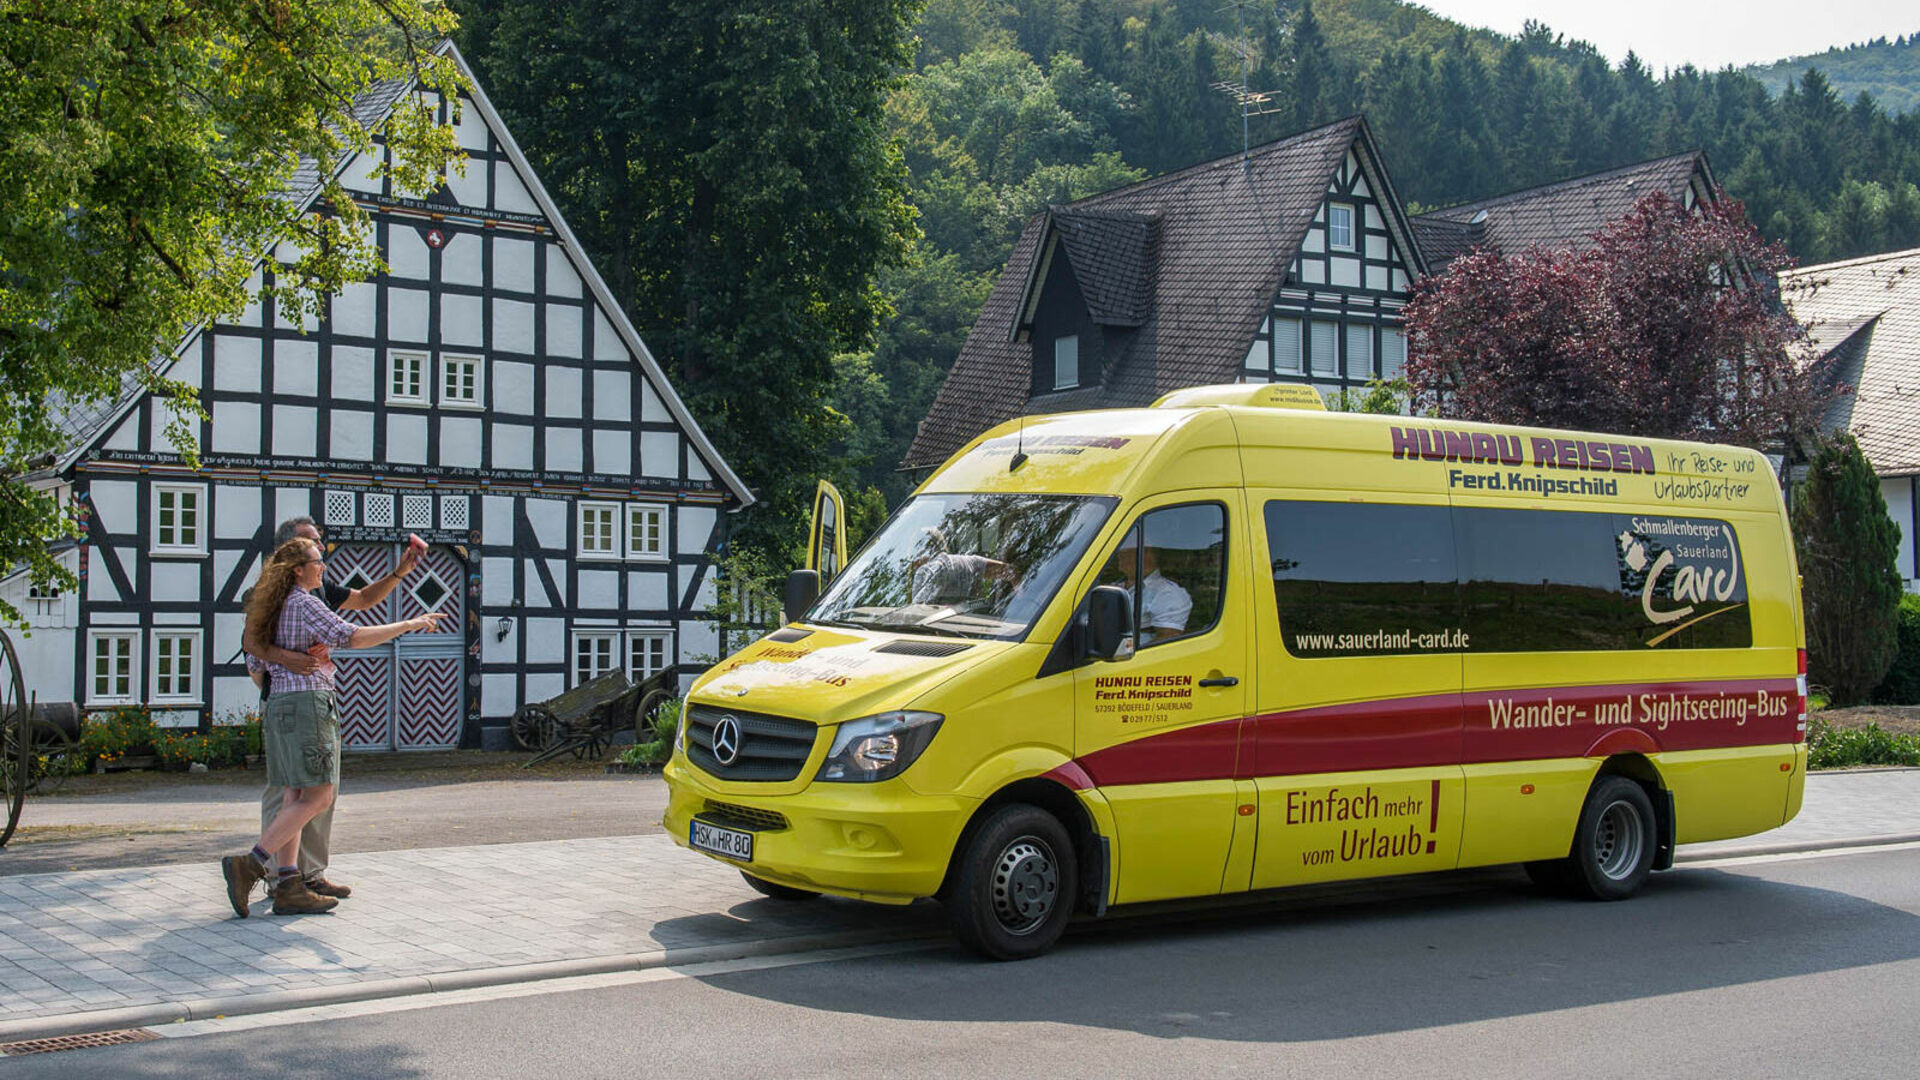 Hiking and sightseeing bus in the Schmallenberger Sauerland